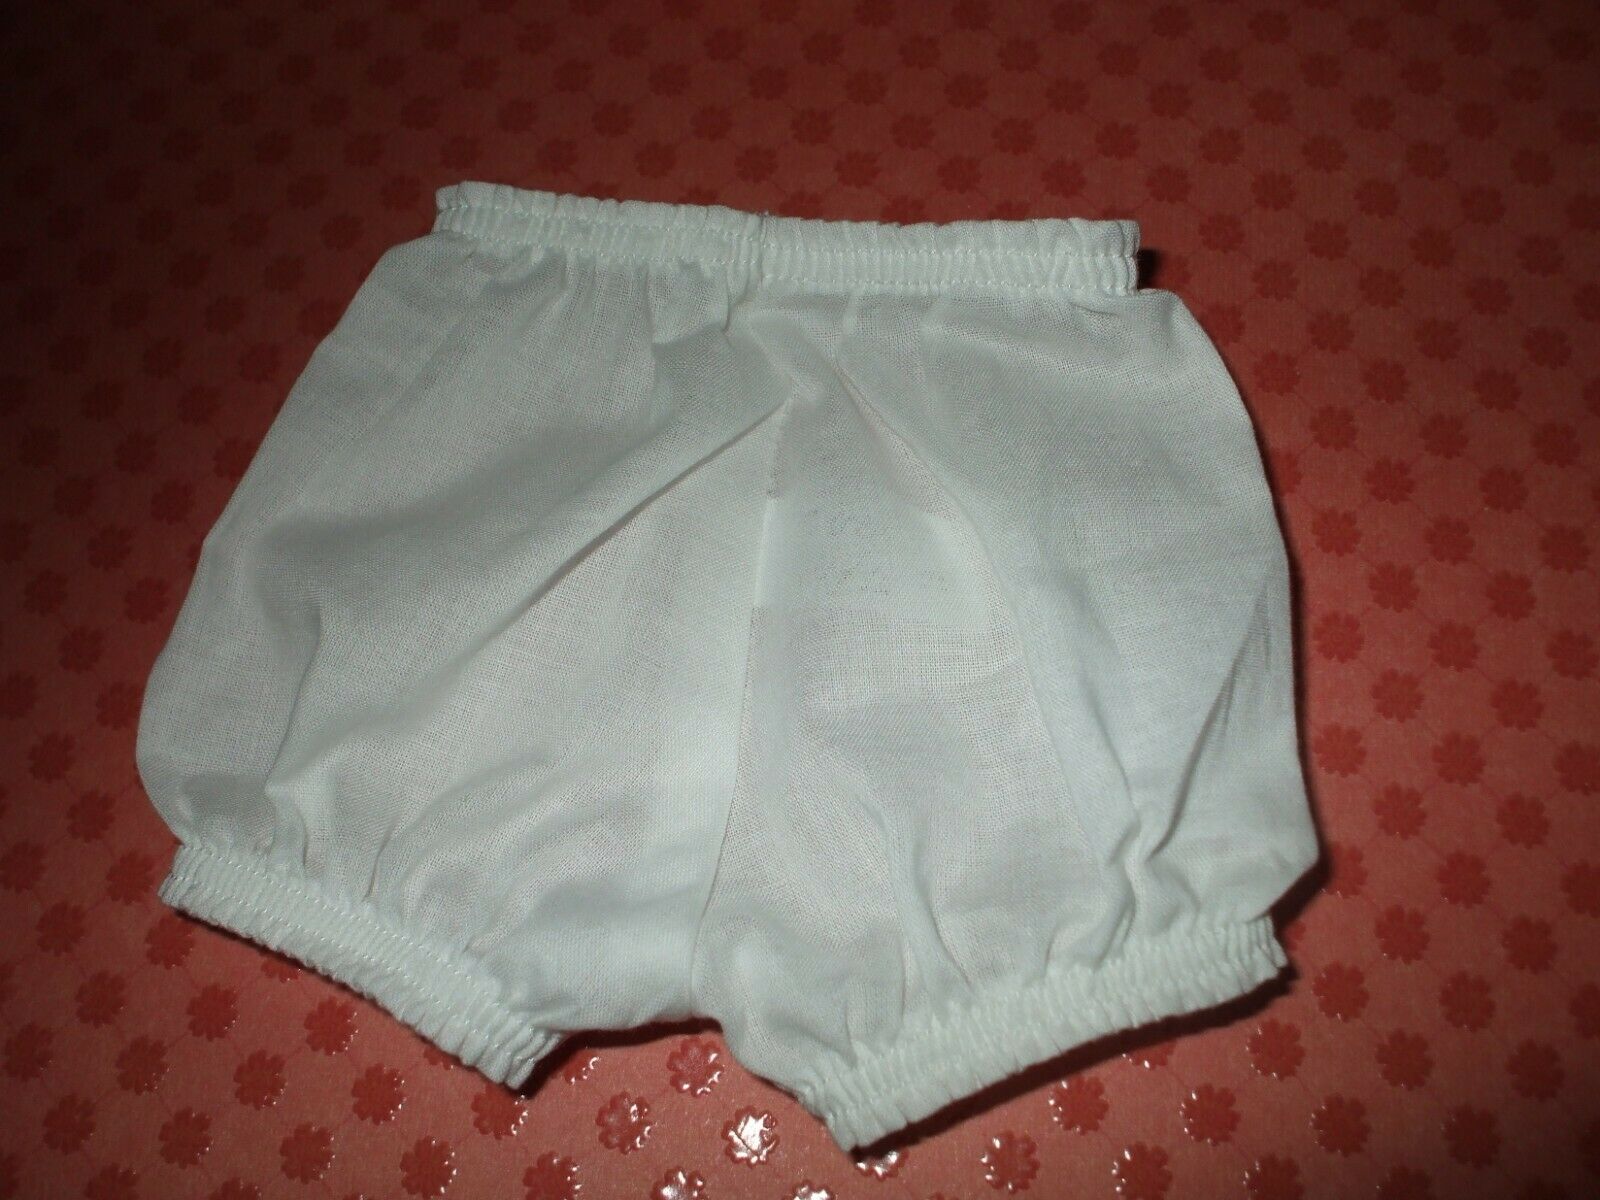 New Clean White Panties For 14-16" Toni Ideal Dolls Or Dolls 6-8 Inch Waist